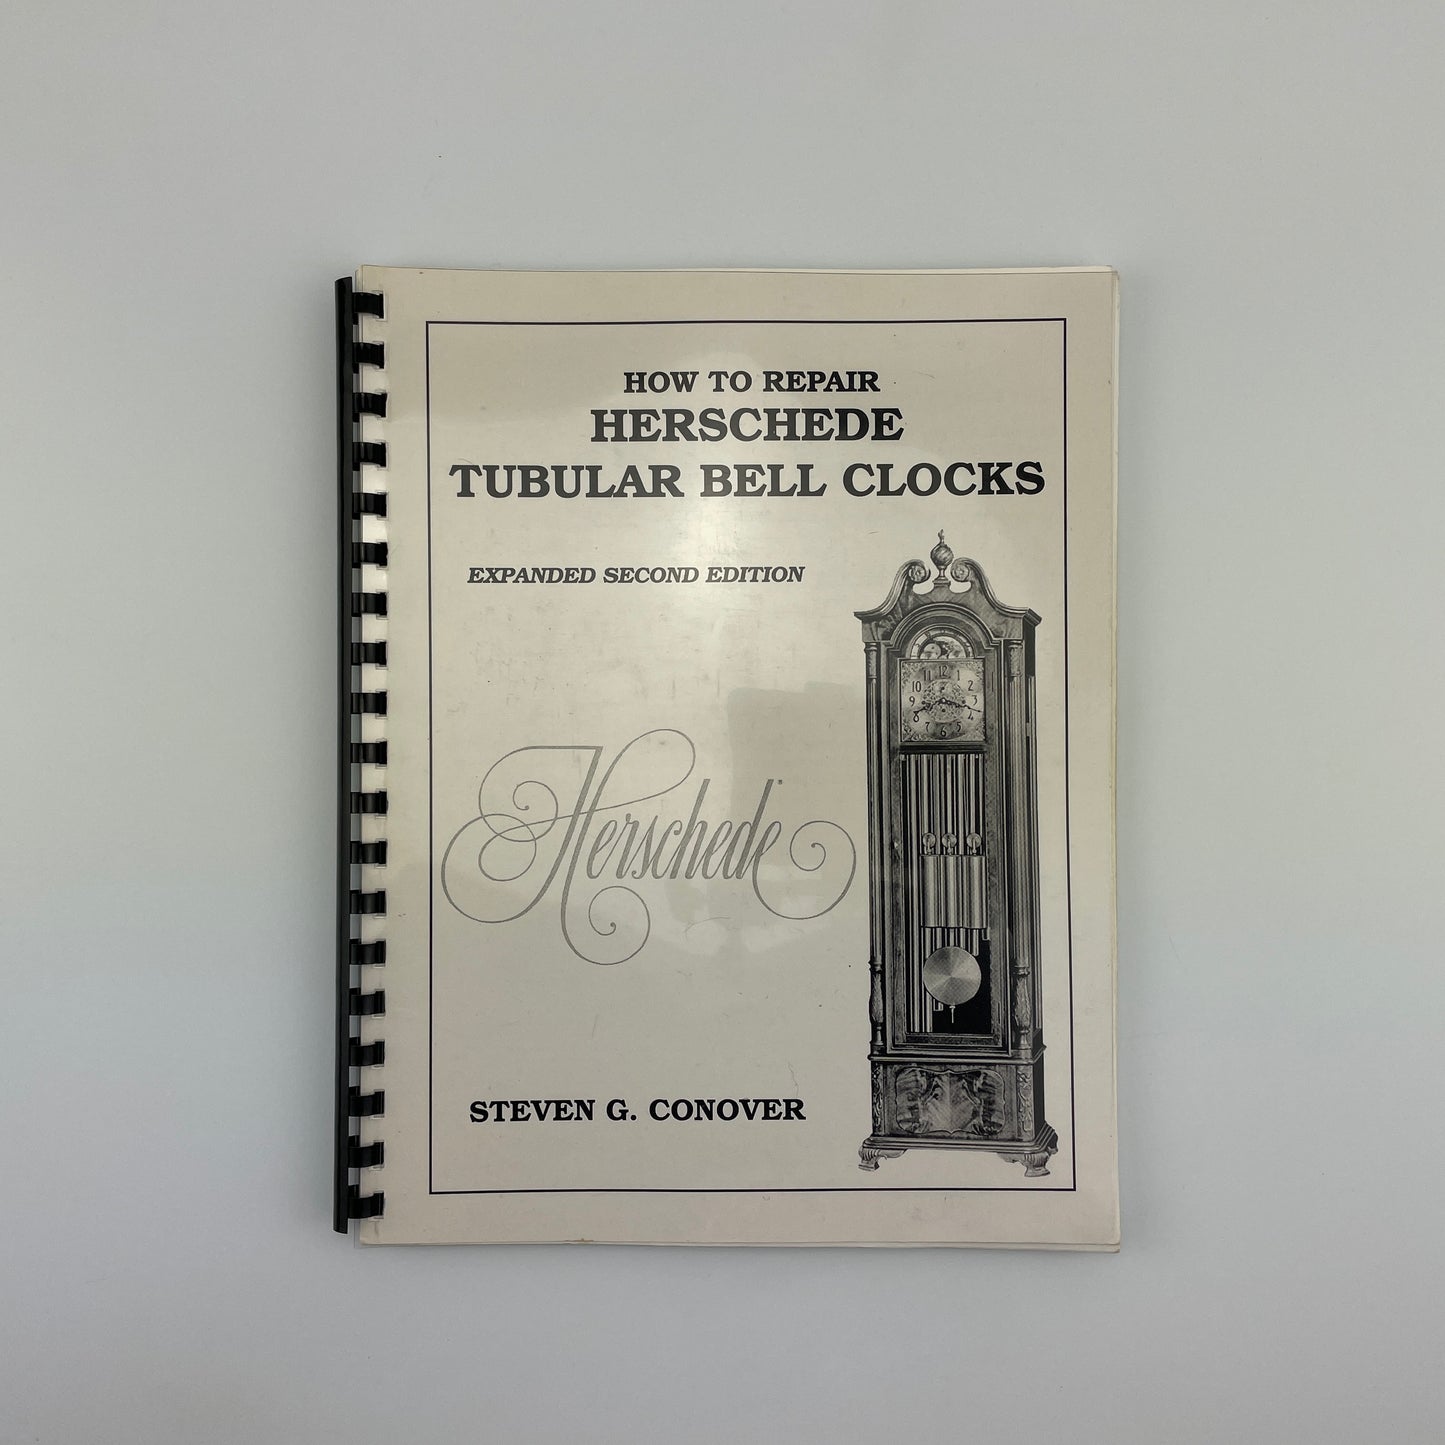 How to Repair Herschede Tubular Bell Clocks